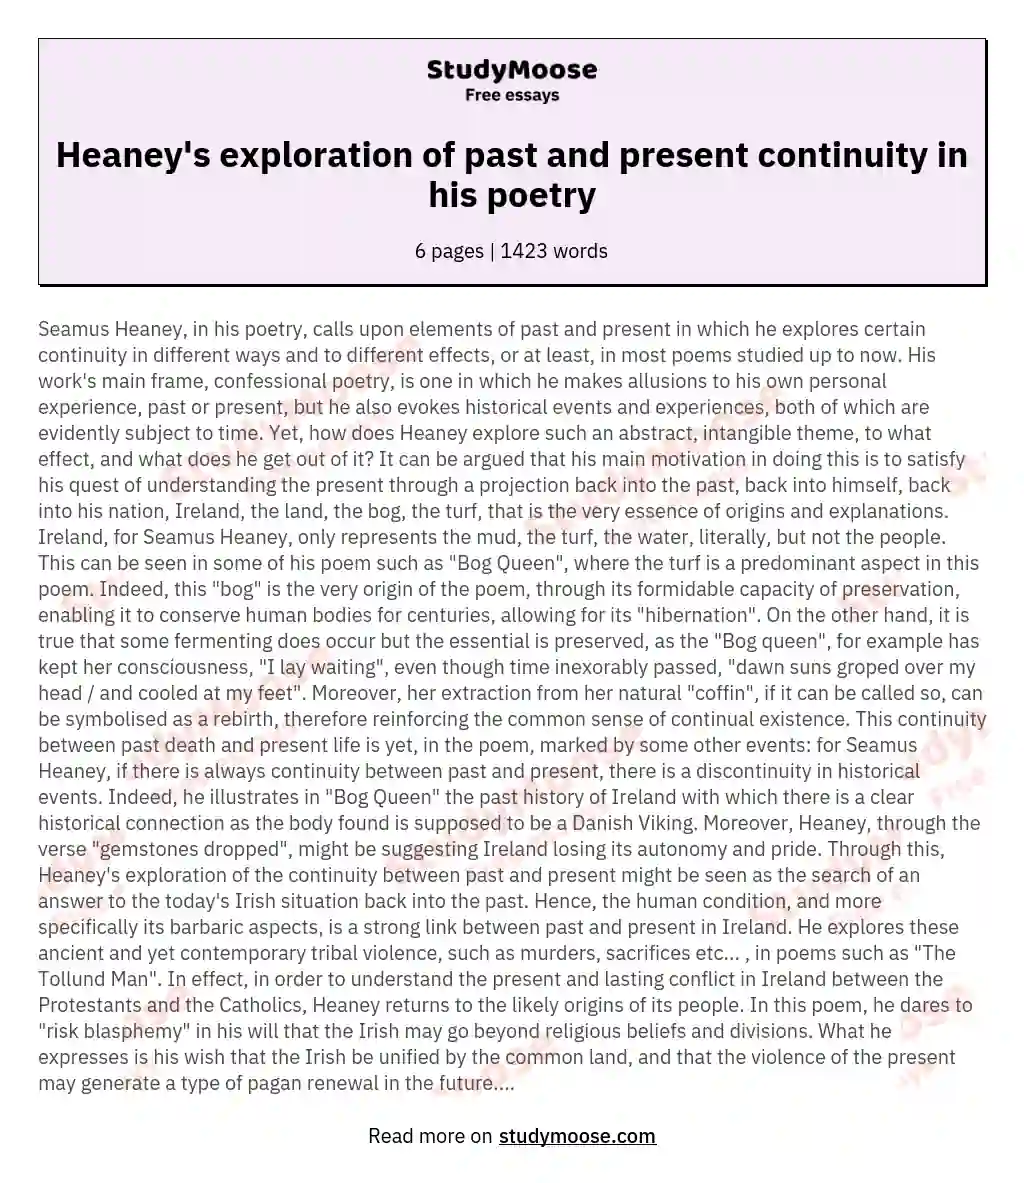 Heaney's exploration of past and present continuity in his poetry essay